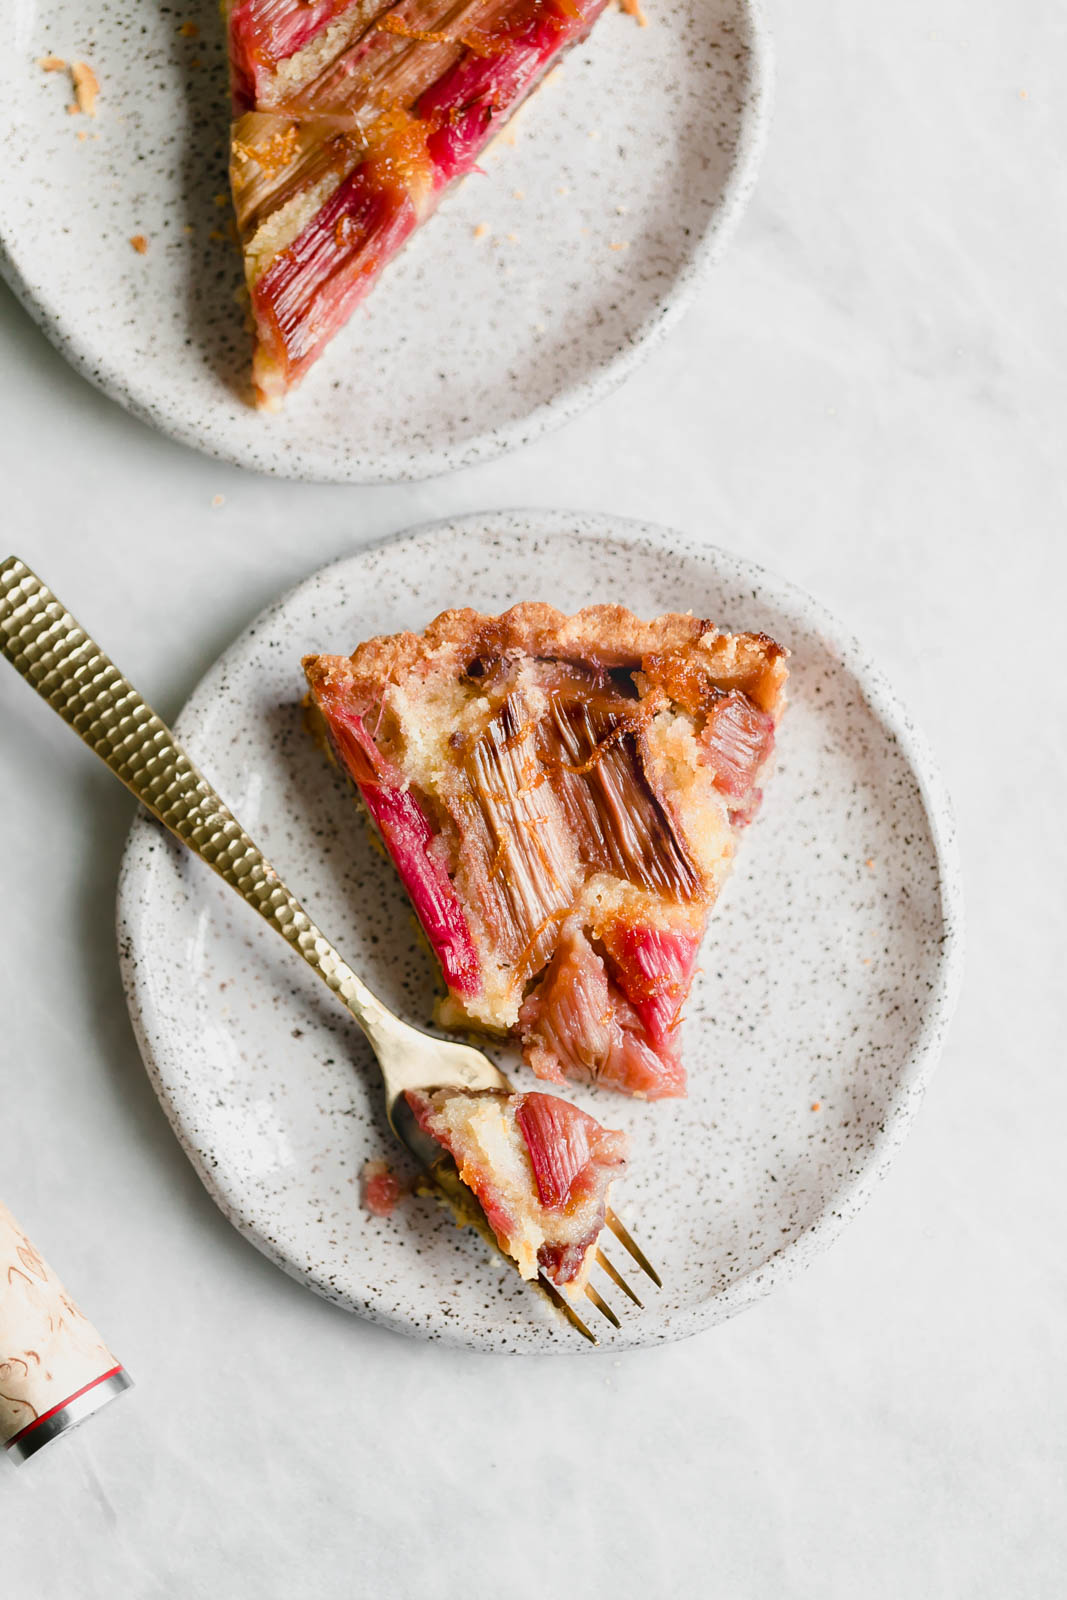 The most showstopping Rhubarb Bakewell Tart made with a pâte sucrée crust, strawberry preserves, almond frangipane, and an orange-soaked rhubarb top